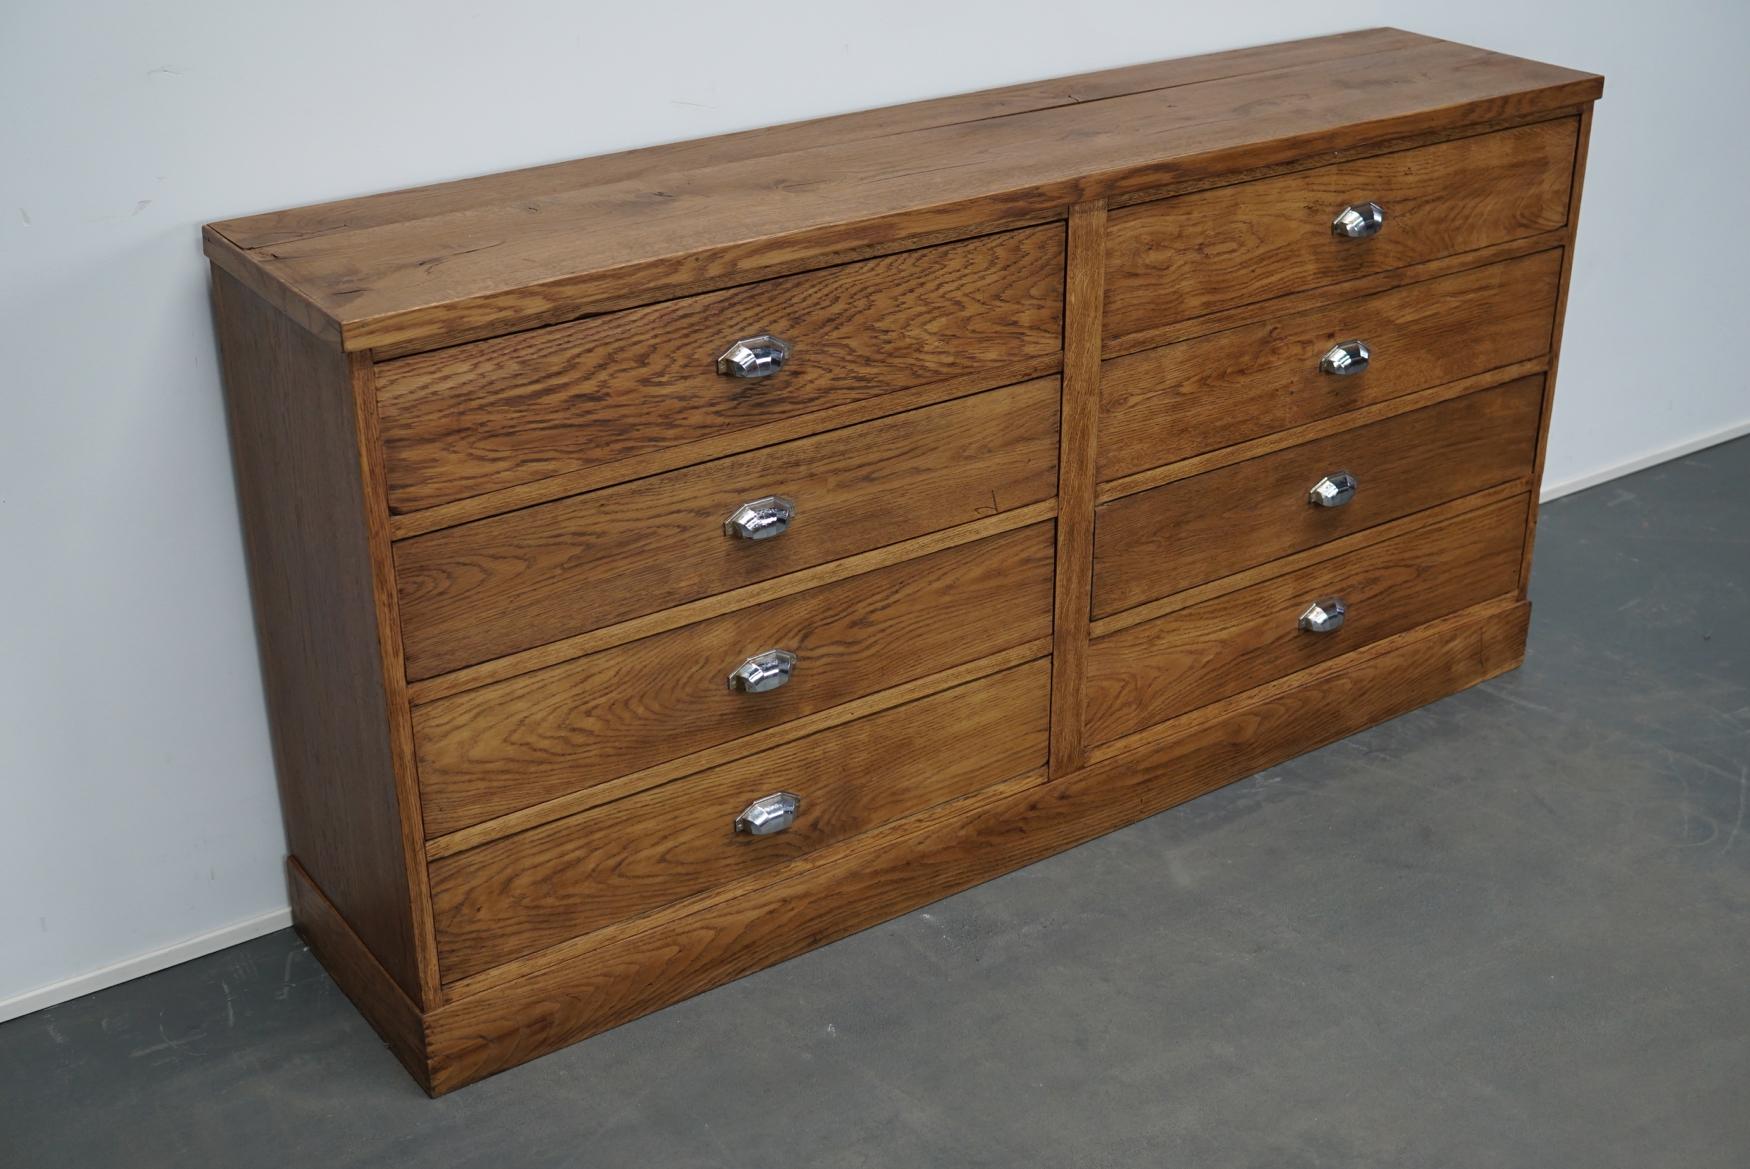 This apothecary cabinet of drawers was designed, circa 1930s in France. The piece is made from oak and features 8 drawers with Art Deco style hardware. The interior dimensions of the drawers are: 27.5 D x 71.5 W x 12.5 H cm.